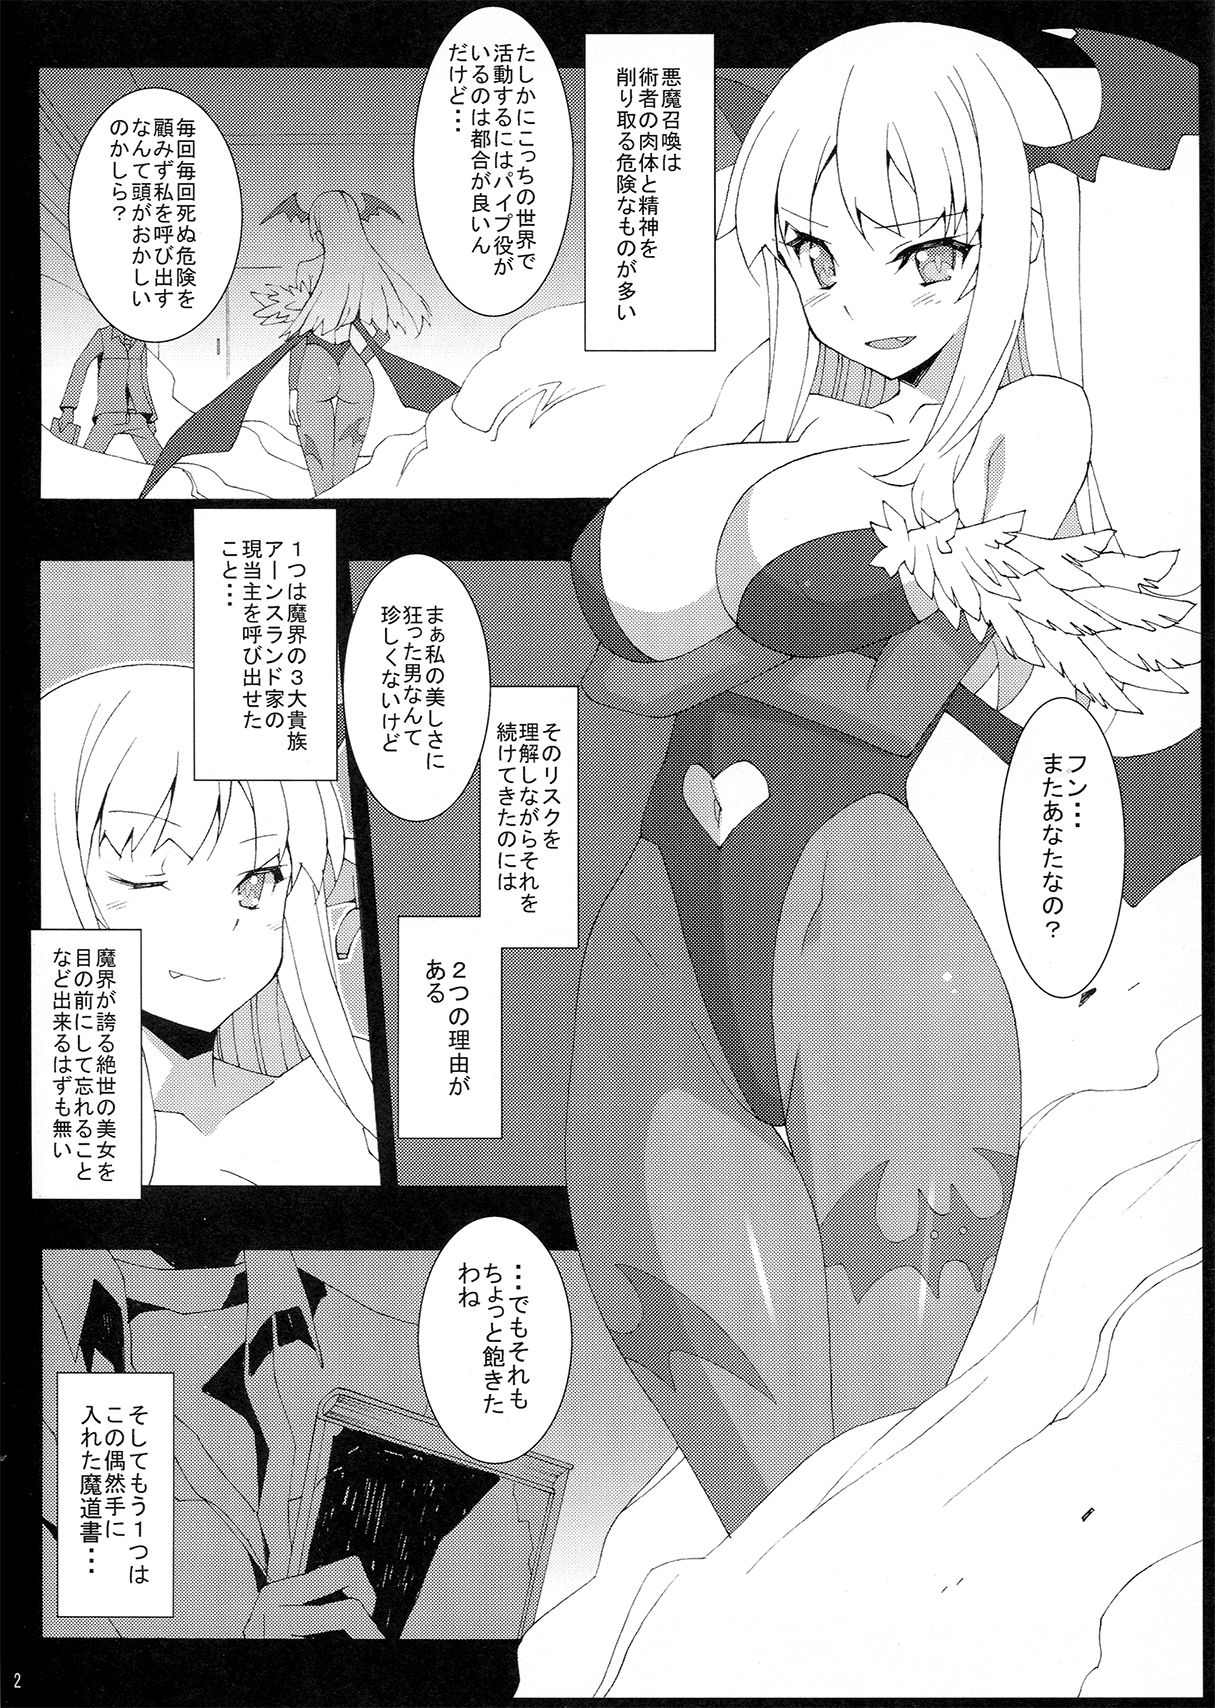 (C82) [Mushimusume Aikoukai (ASTROGUY2)] SUCCUBUSLAVE (Darkstalkers) (C82) [蟲娘愛好会 (ASTROGUY2)] SUCCUBUSLAVE (ヴァンパイア)